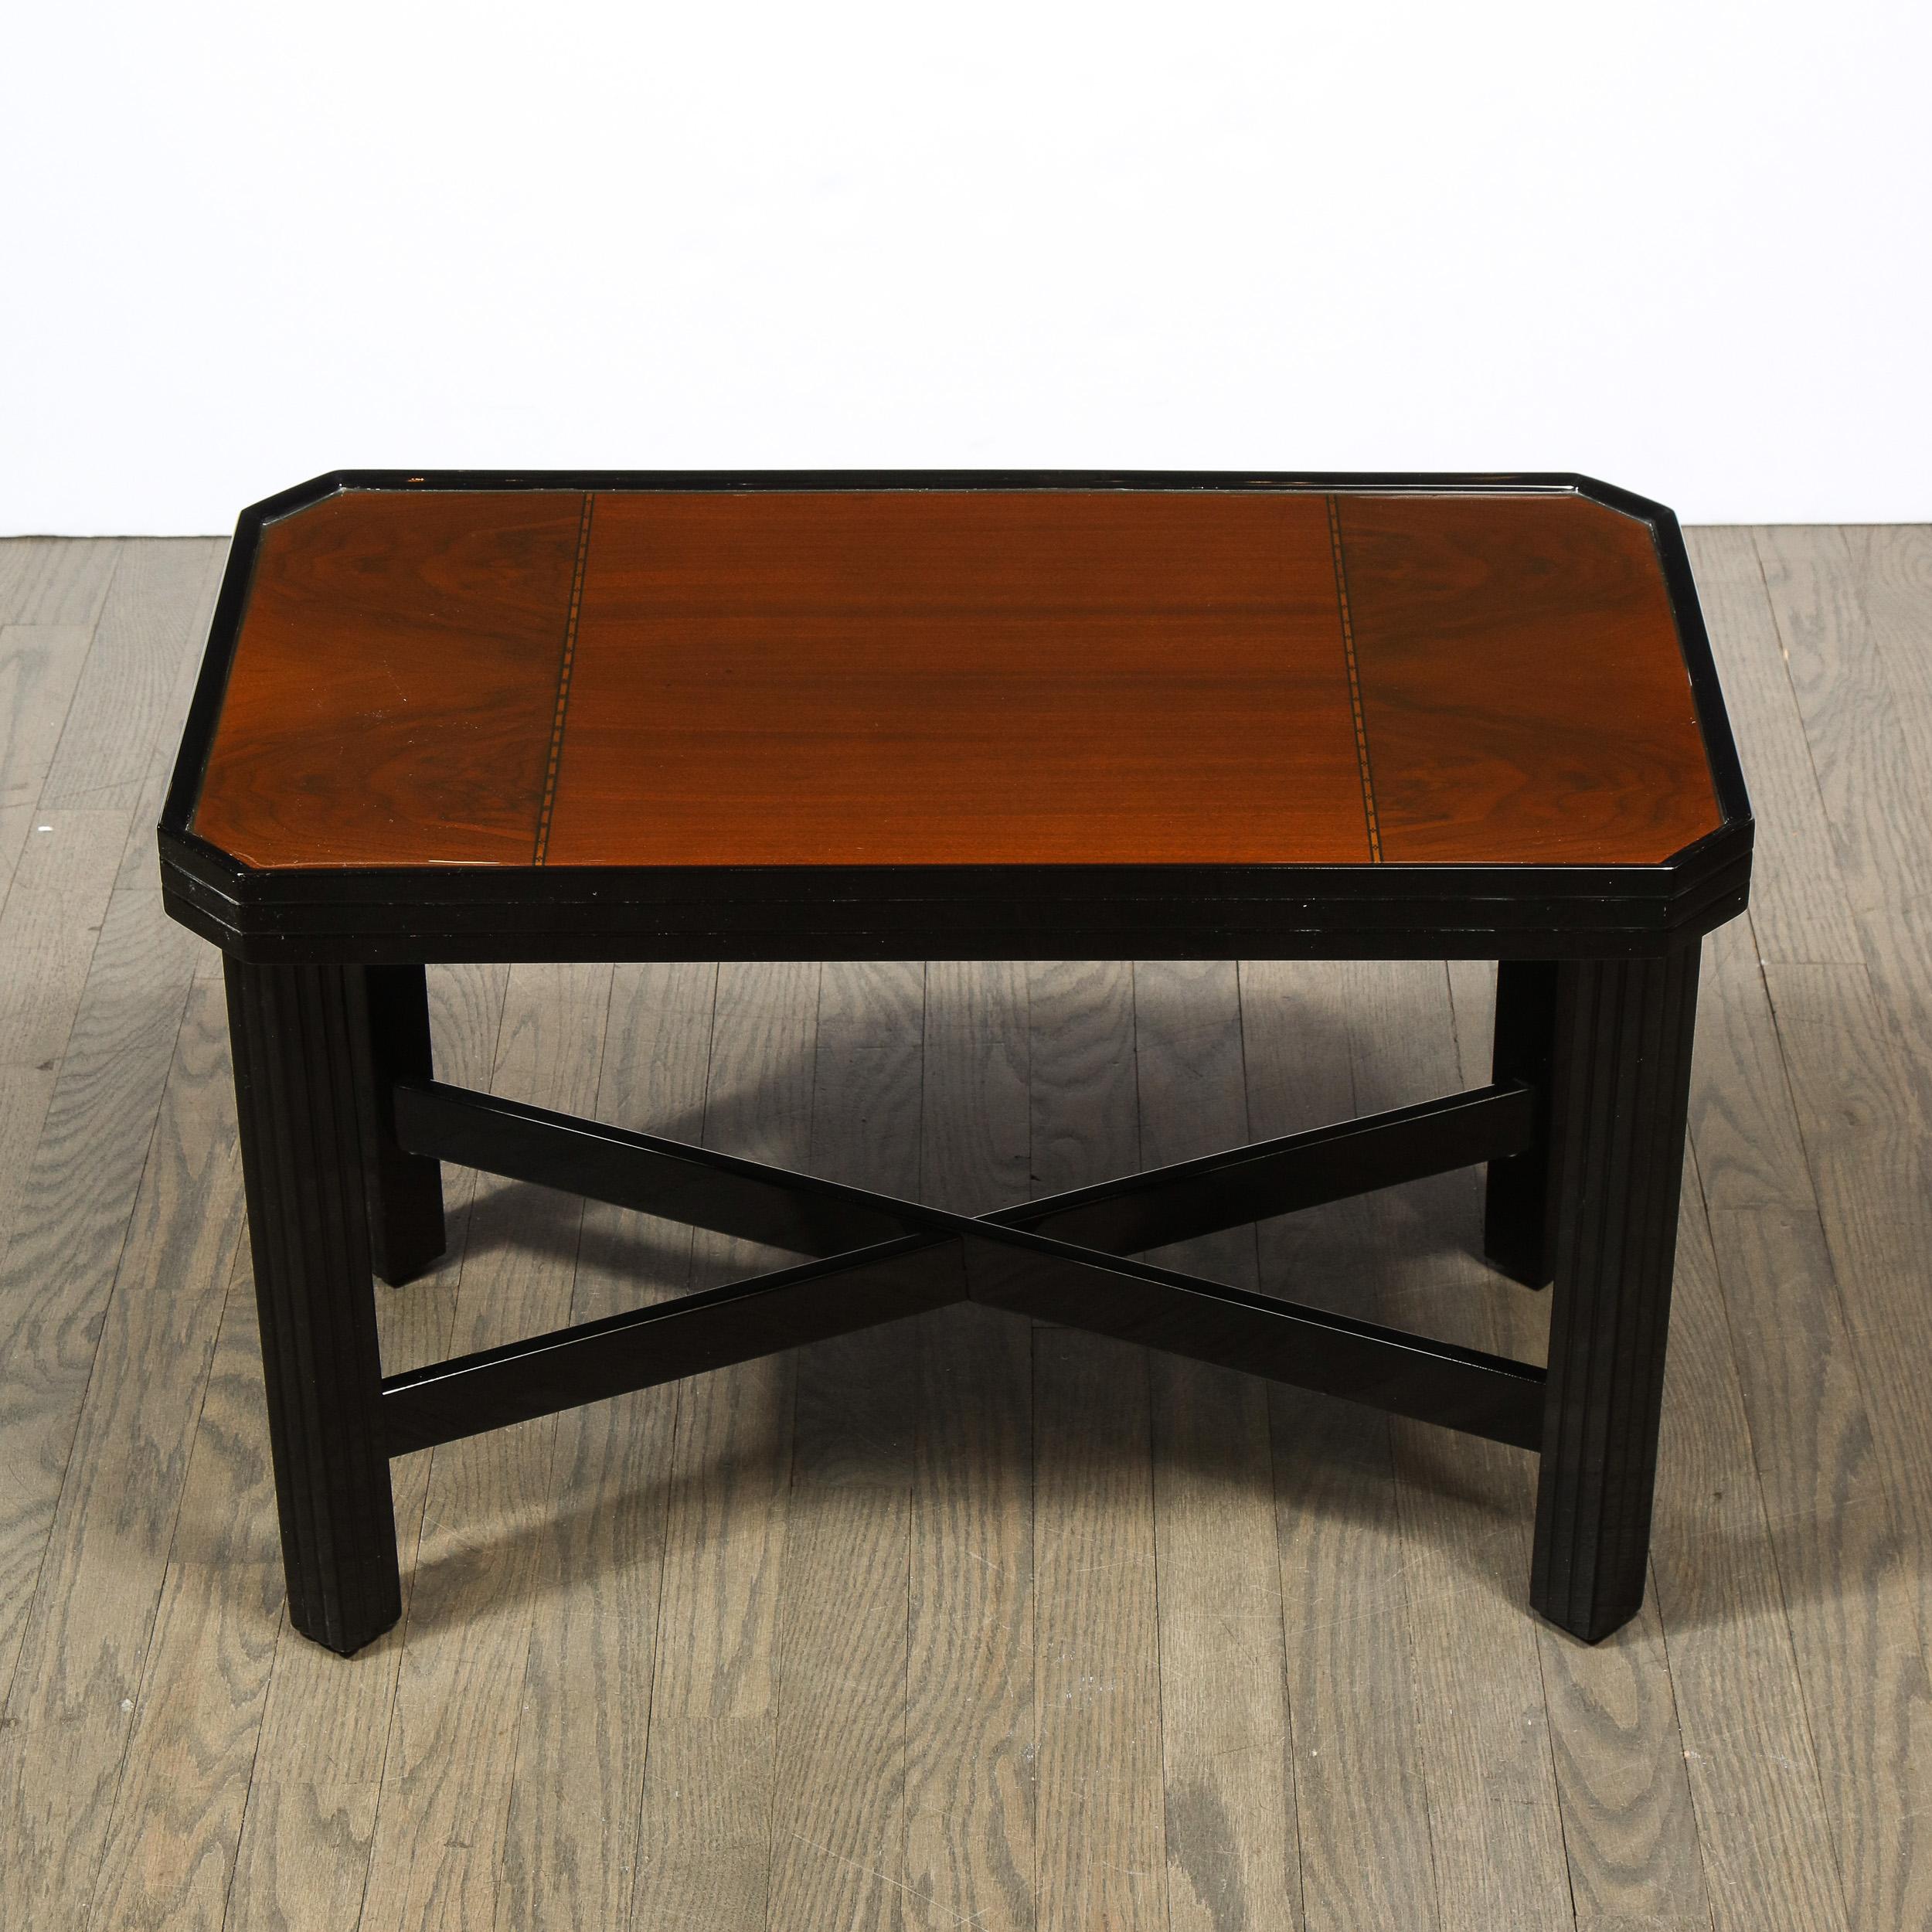 American Art Deco Machine Age Black Lacquer Burled & Bookmatched Walnut Side Table For Sale